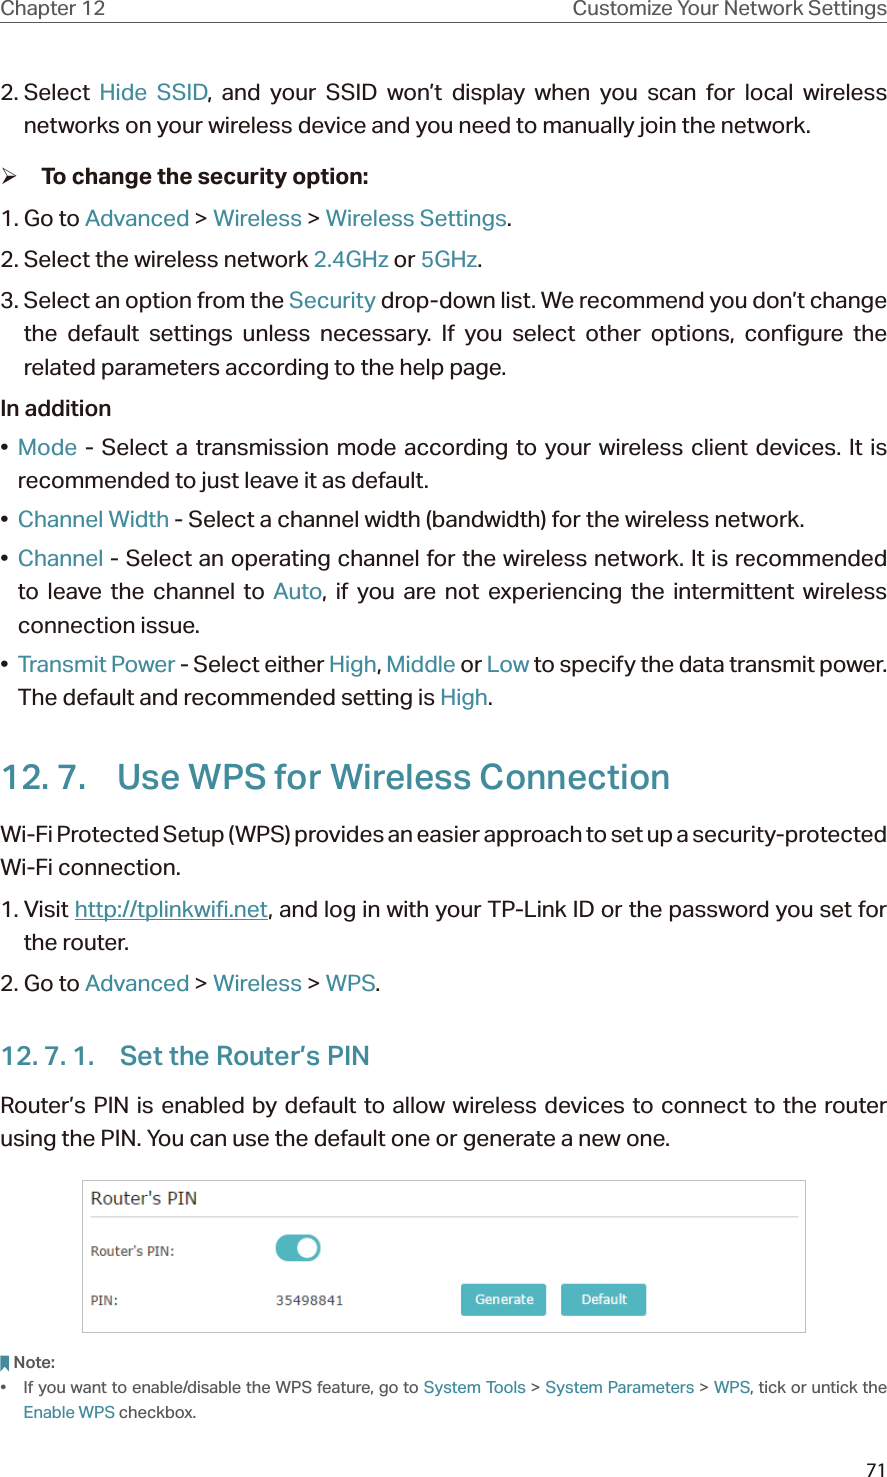 71Chapter 12 Customize Your Network Settings2. Select  Hide SSID, and your SSID won’t display when you scan for local wireless networks on your wireless device and you need to manually join the network. ¾To change the security option:1. Go to Advanced &gt; Wireless &gt; Wireless Settings. 2. Select the wireless network 2.4GHz or 5GHz.3. Select an option from the Security drop-down list. We recommend you don’t change the default settings unless necessary. If you select other options, configure the related parameters according to the help page.In addition•  Mode - Select a transmission mode according to your wireless client devices. It is recommended to just leave it as default.•  Channel Width - Select a channel width (bandwidth) for the wireless network.•  Channel - Select an operating channel for the wireless network. It is recommended to leave the channel to Auto, if you are not experiencing the intermittent wireless connection issue.•  Transmit Power - Select either High, Middle or Low to specify the data transmit power. The default and recommended setting is High.12. 7.  Use WPS for Wireless ConnectionWi-Fi Protected Setup (WPS) provides an easier approach to set up a security-protected Wi-Fi connection.1. Visit http://tplinkwifi.net, and log in with your TP-Link ID or the password you set for the router.2. Go to Advanced &gt; Wireless &gt; WPS.12. 7. 1.  Set the Router’s PINRouter’s PIN is enabled by default to allow wireless devices to connect to the router using the PIN. You can use the default one or generate a new one.Note:•  If you want to enable/disable the WPS feature, go to System Tools &gt; System Parameters &gt; WPS, tick or untick the Enable WPS checkbox.